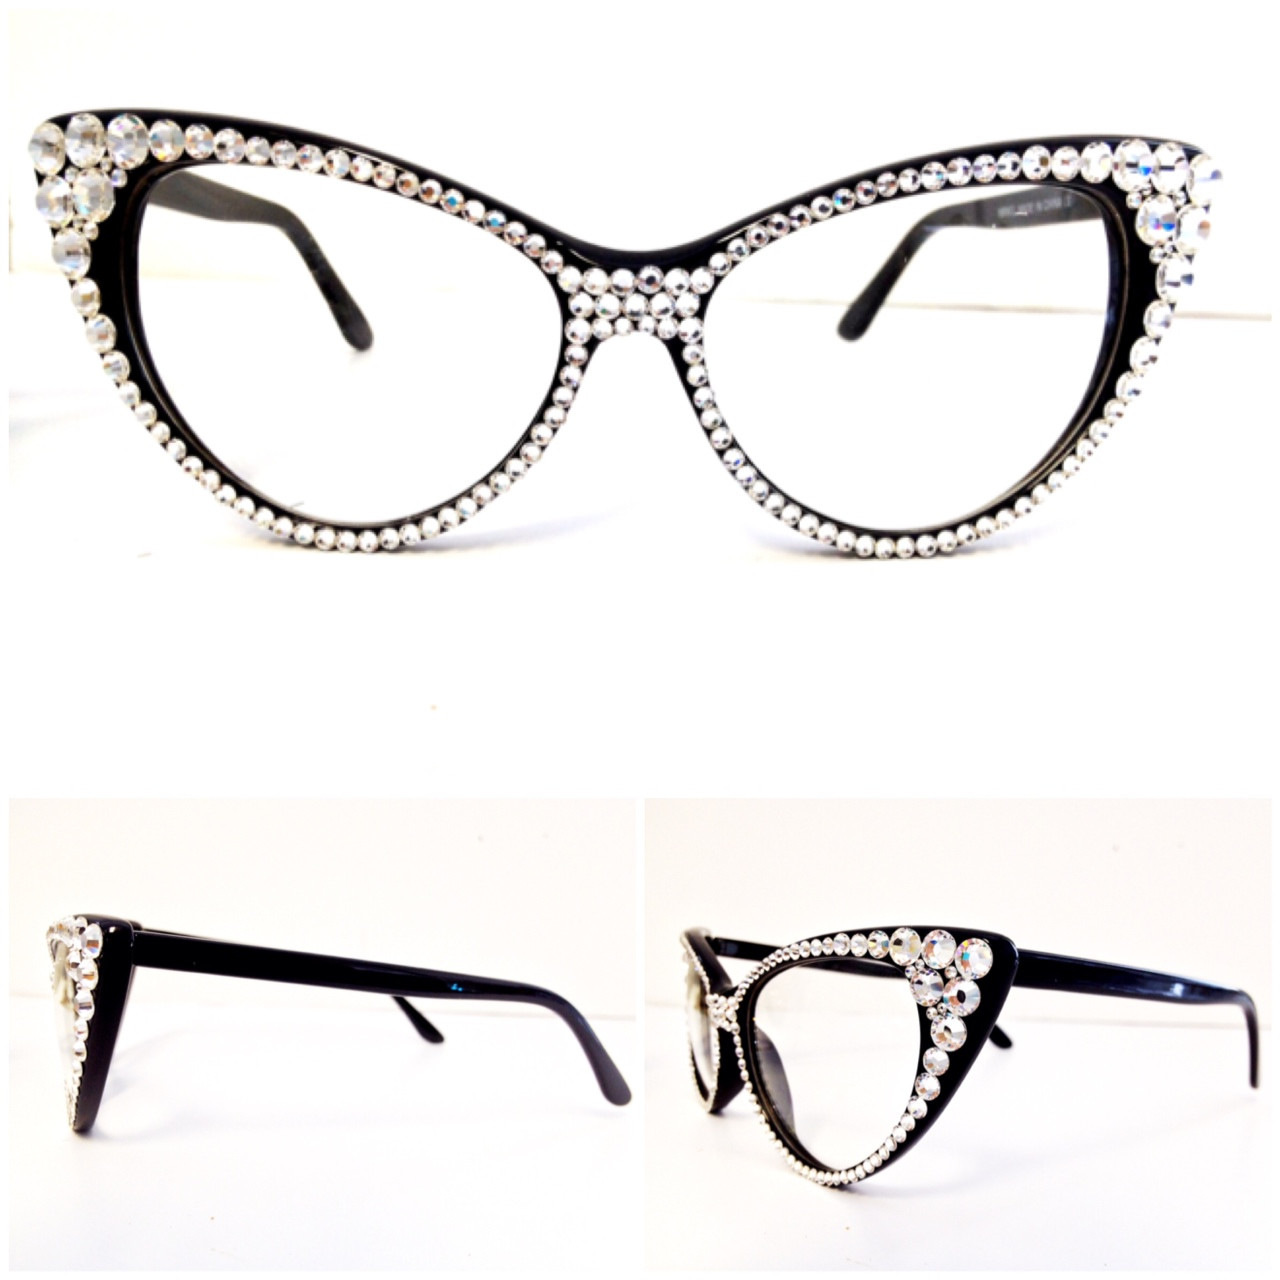 Optical CRYSTAL Cat Eye Glasses - Clear on Black Frame - Divalicious ...